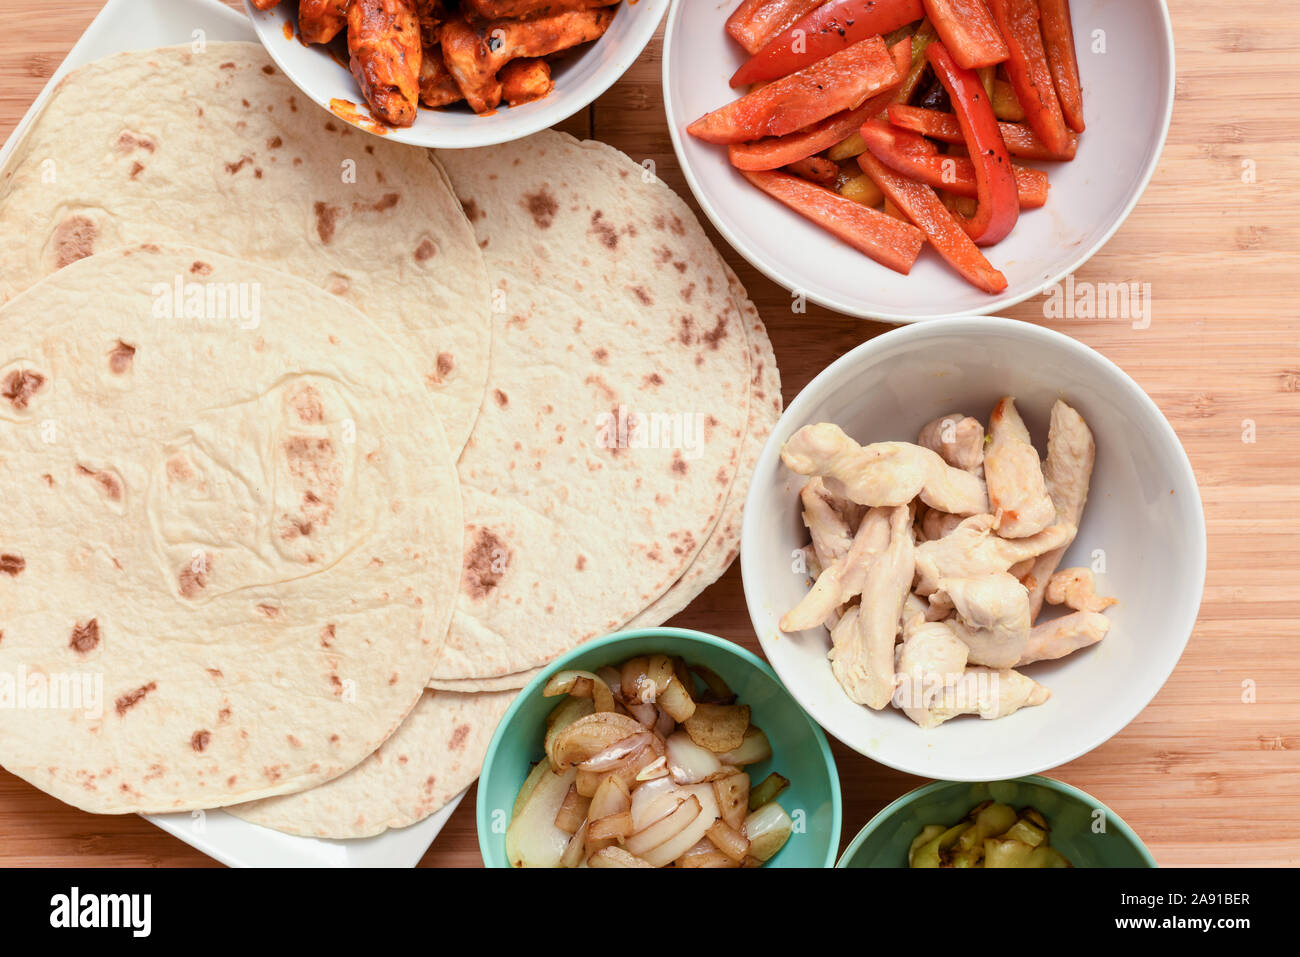 Selection of mexican food ingredients to add to soft flour tortilla at mealtime Stock Photo